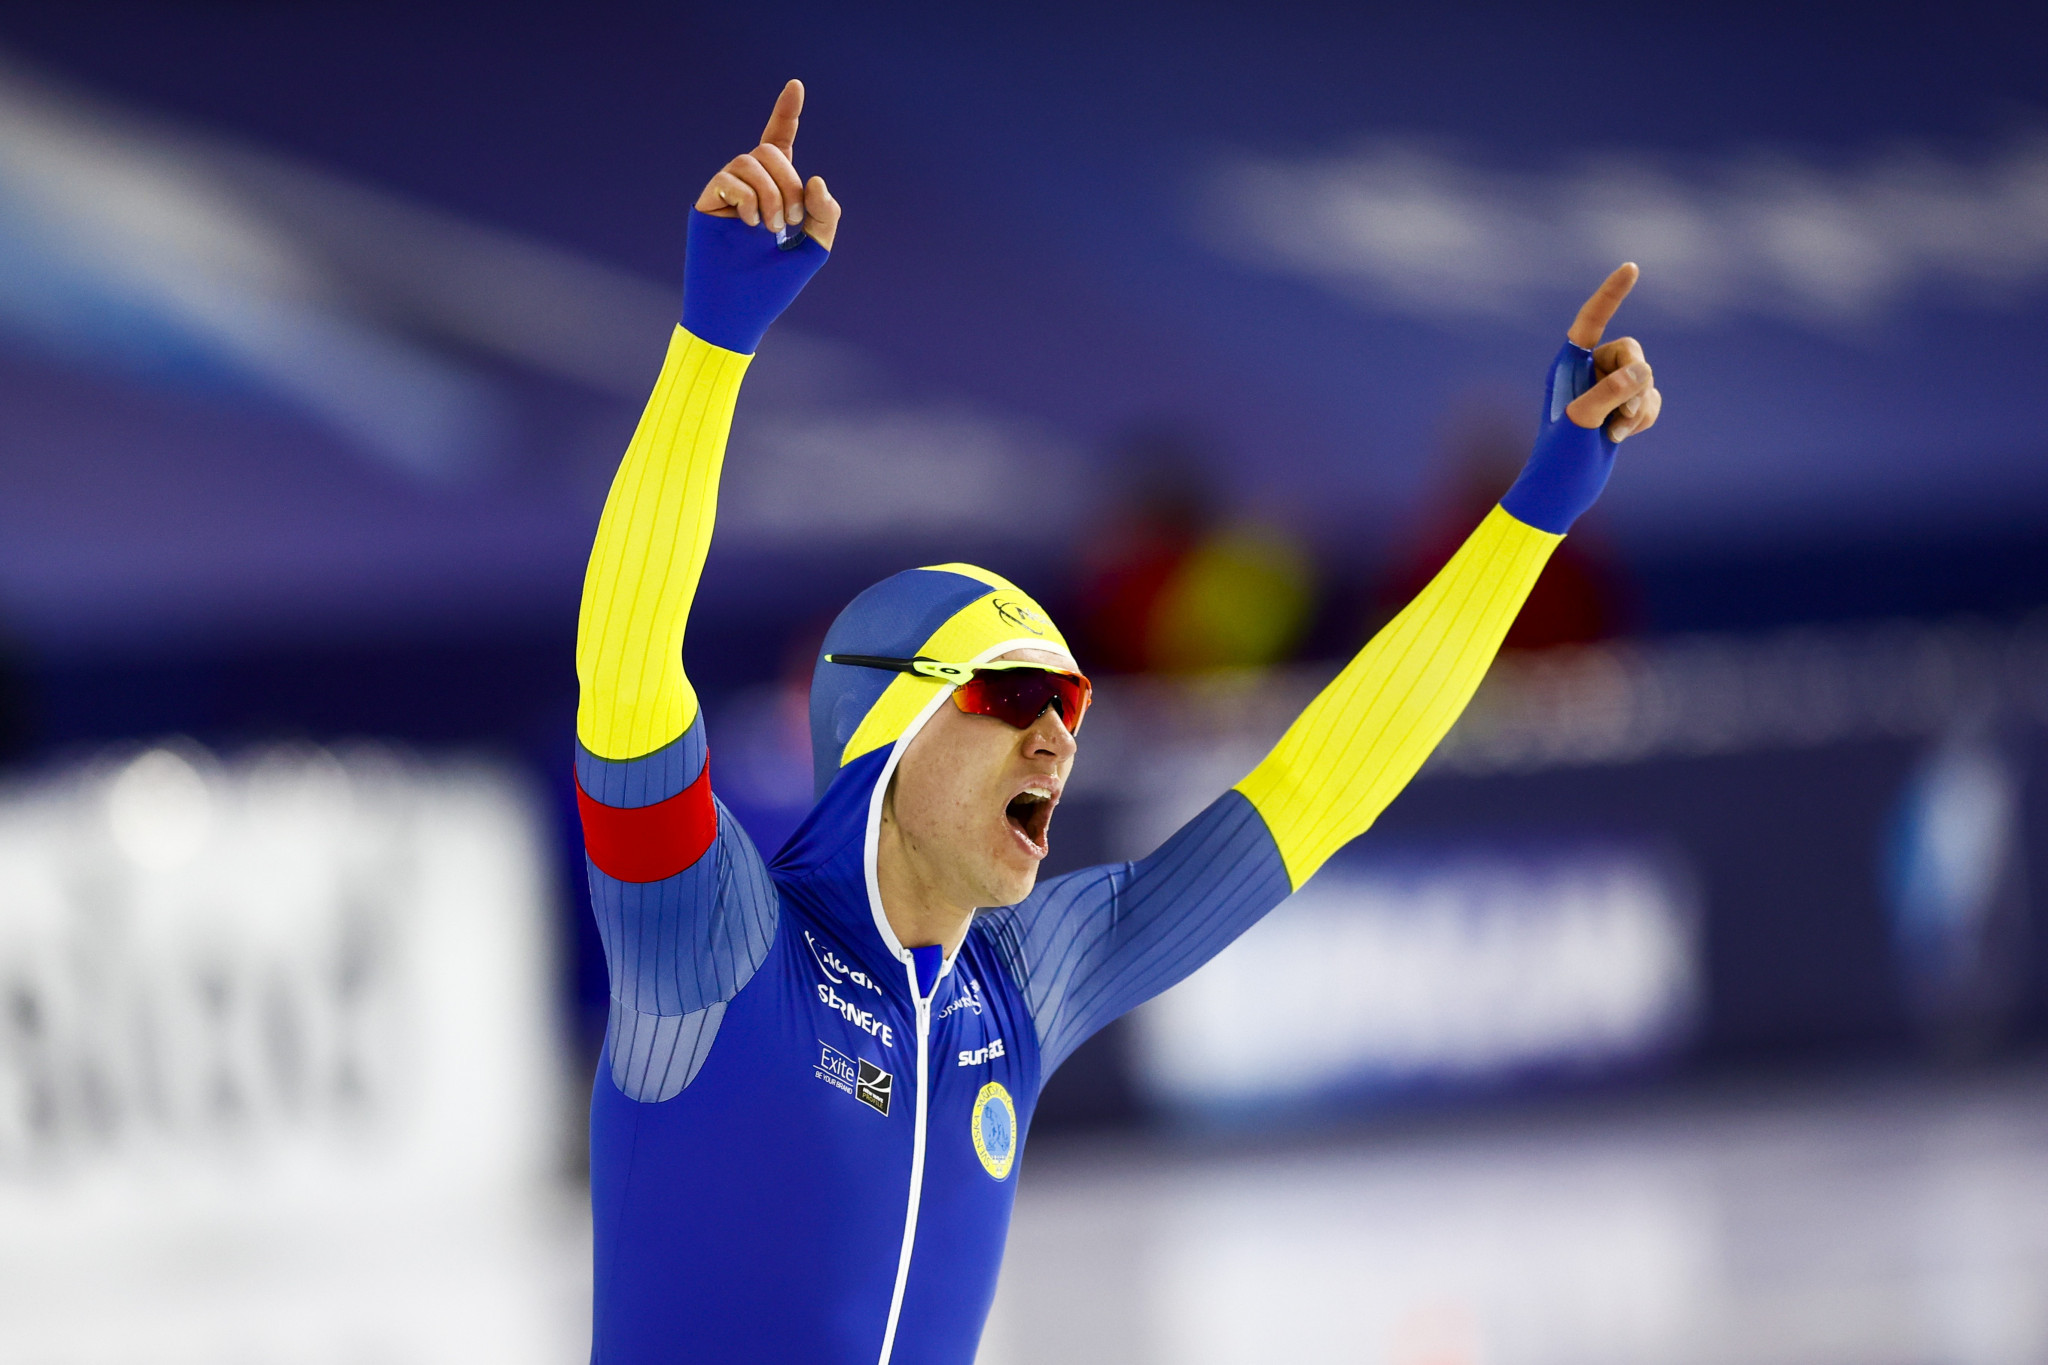 Nils van der Poel is undefeated over 5,000m so far this season ©Getty Images